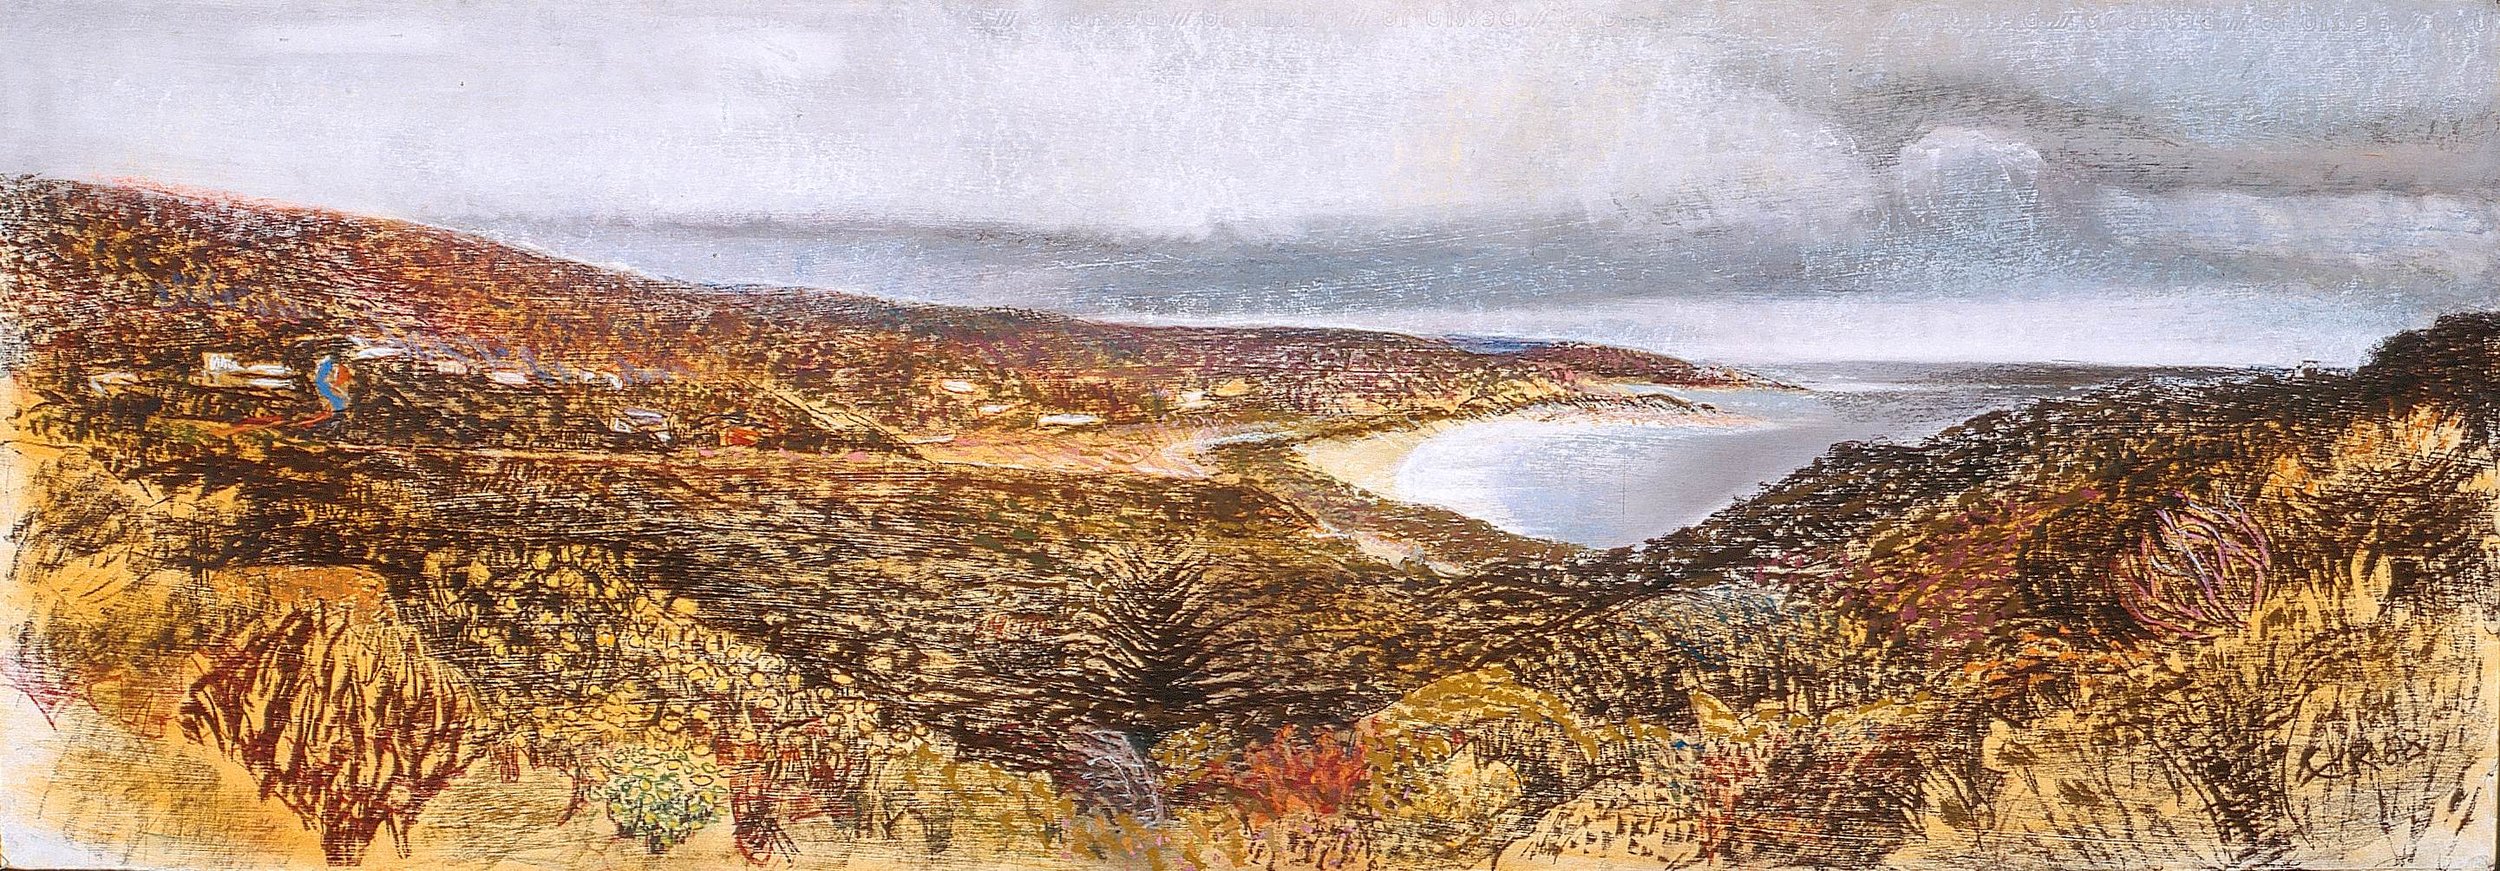 South to Prevelly 1988, pastel on Arches paper, 45 x 110cm. Private Collection 